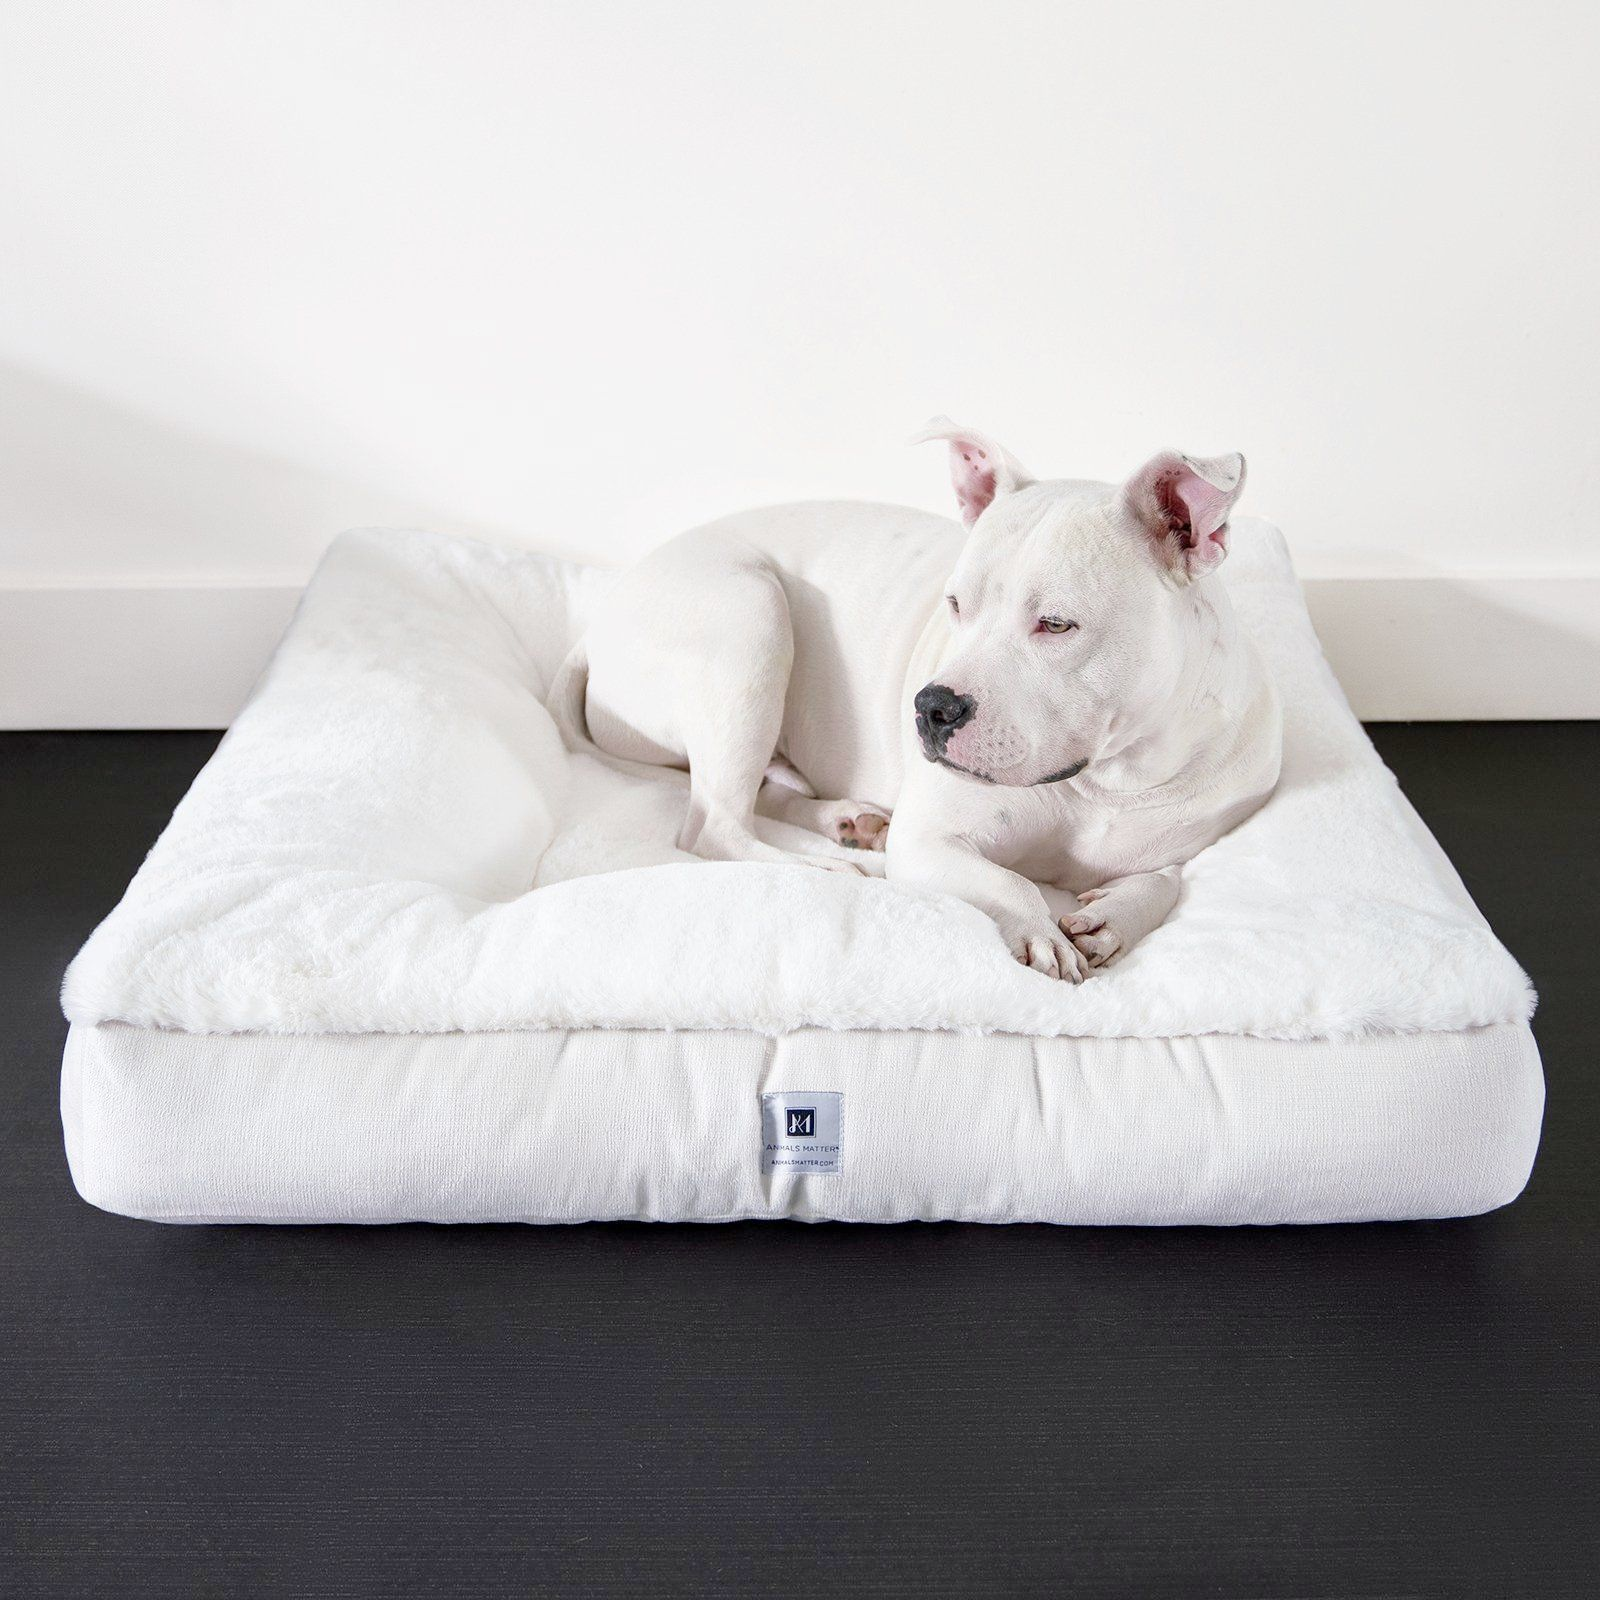 Hudson on the Ruby Square Orthopedic Dog Bed by Animals Matter and a link to purchase.